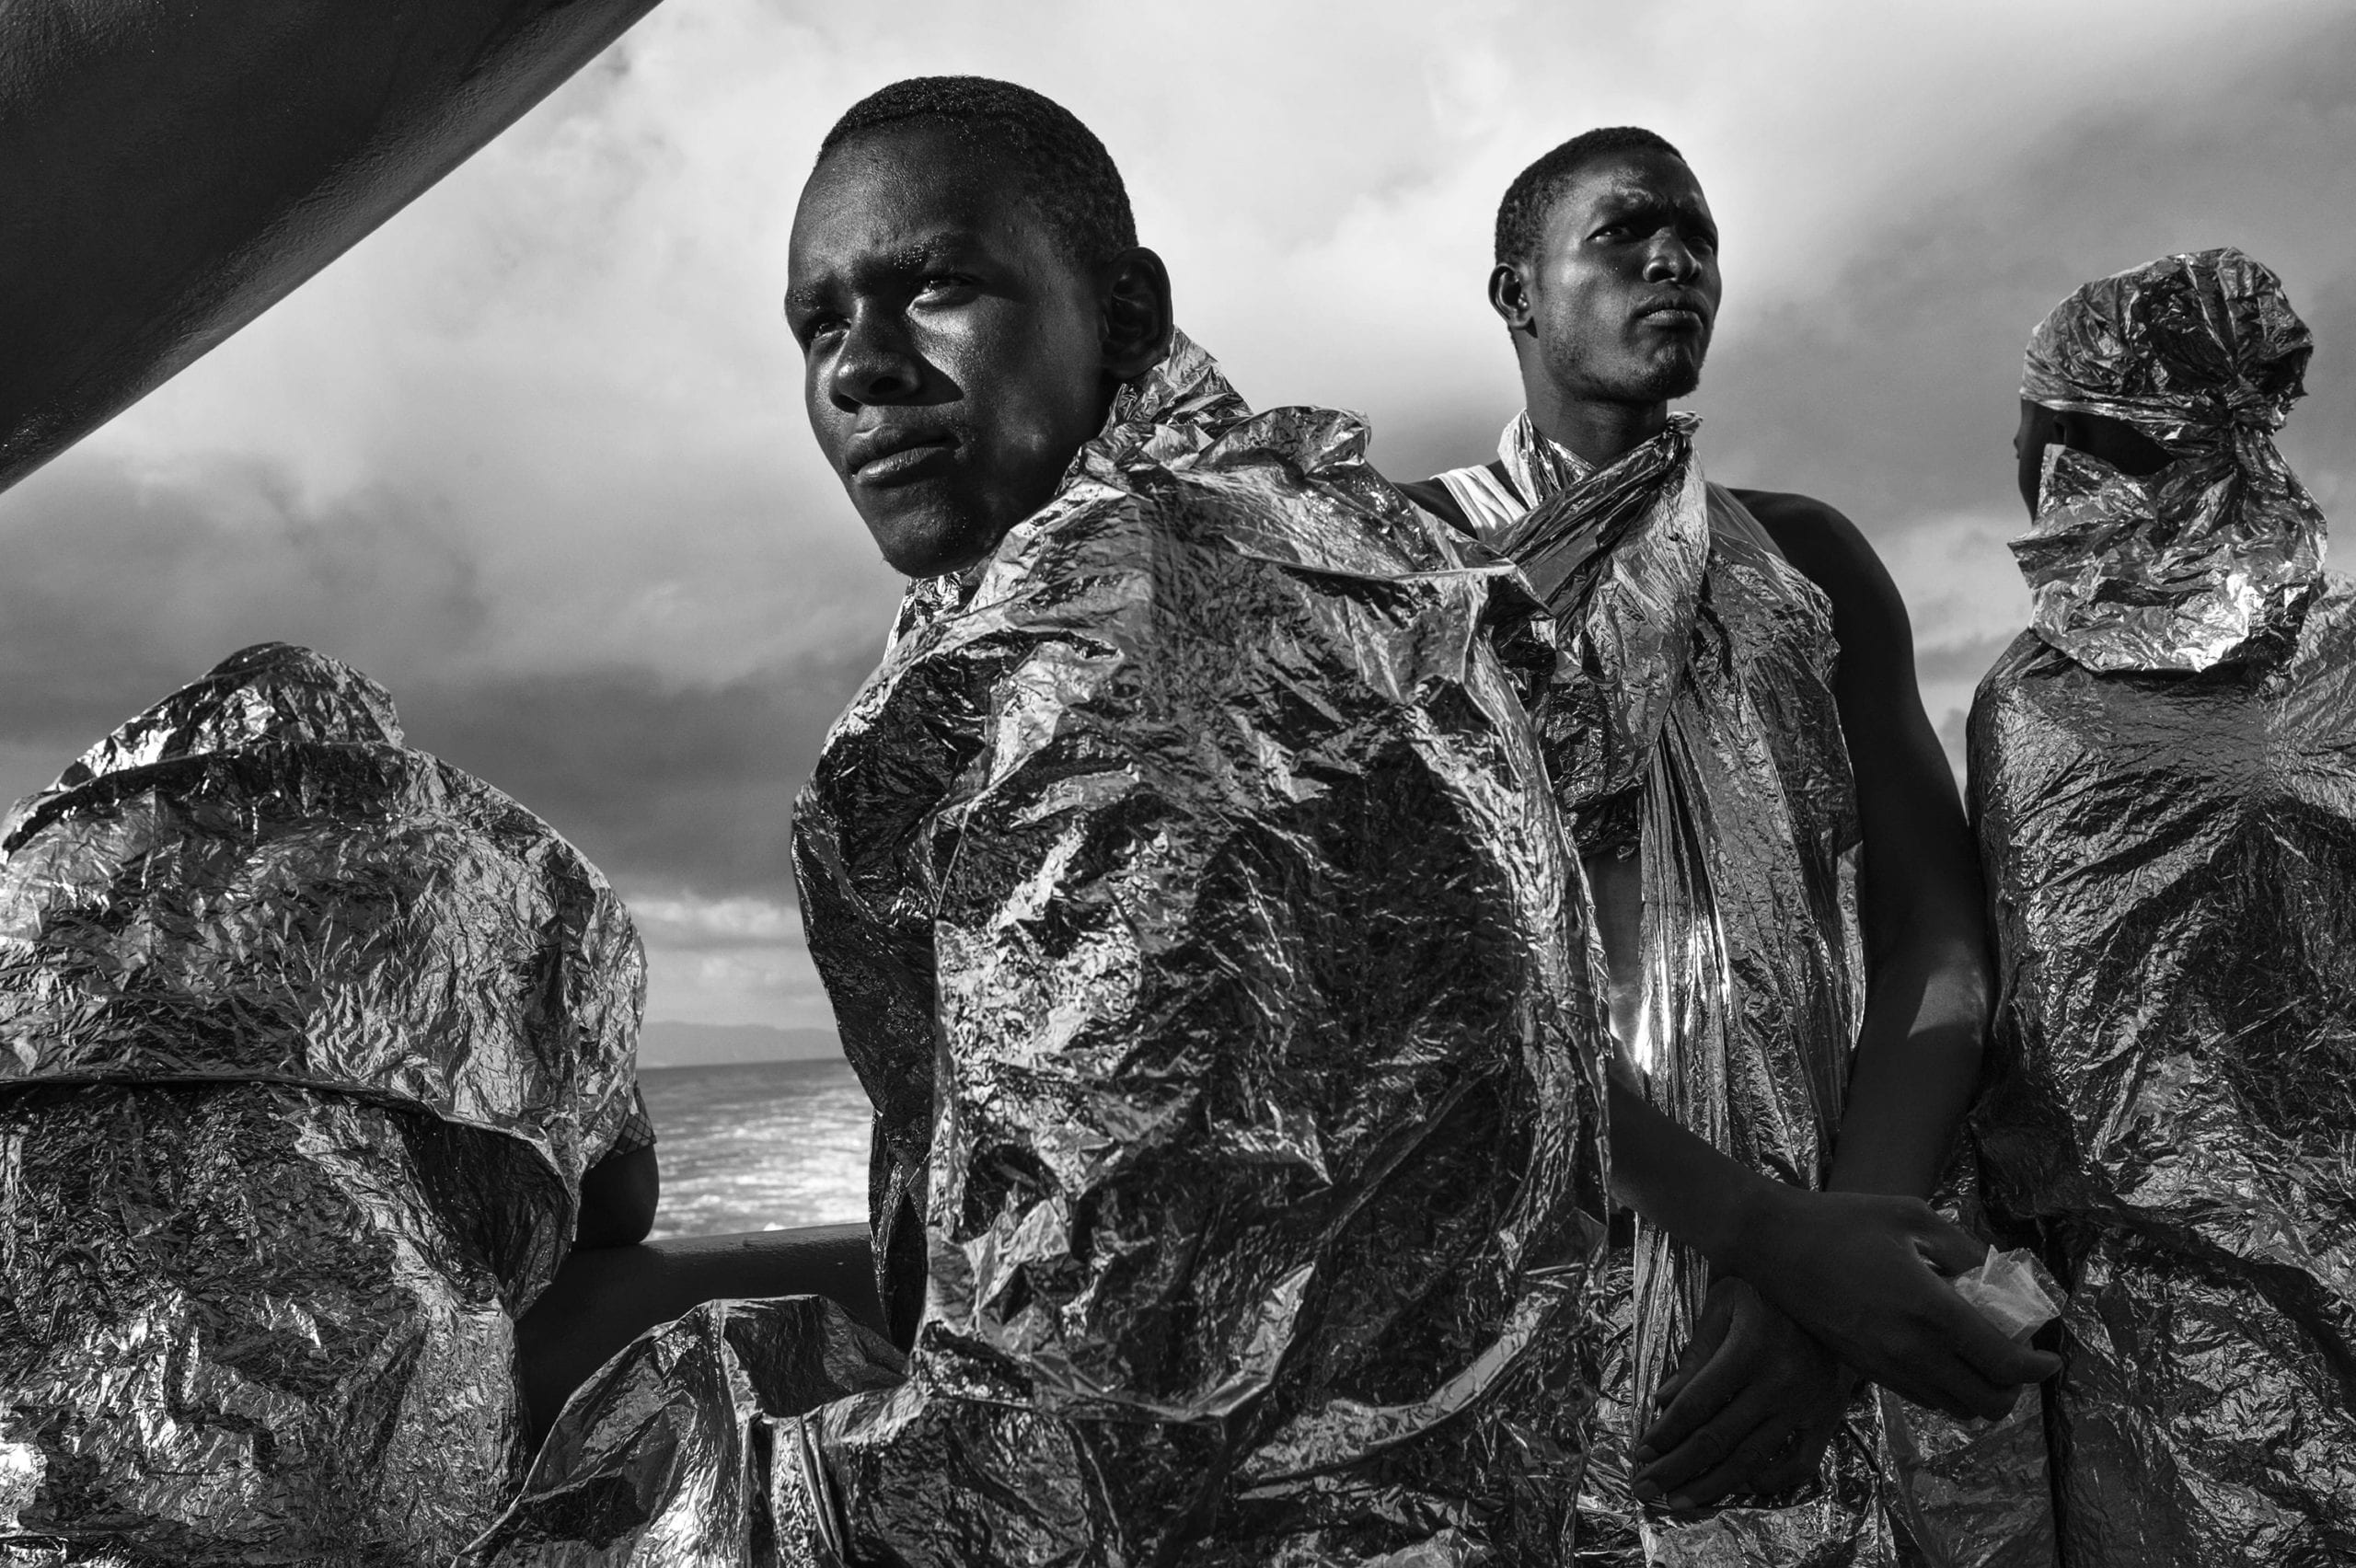 After spending two days and two nights sailing on the Mediterranean Sea on the deck of the M.S.F. (Médecins Sans Frontières - Doctors Without Borders) search and rescue ship Bourbon Argos, rescued migrants - still wrapped in their emergency blankets - catch sight of the Italian coast for the first time soon after dawn. 23 August 2015. In 2015 the ever-increasing number of migrants attempting to cross the Mediterranean Sea on unseaworthy vessels towards Europe led to an unprecedented crisis. Nearly 120 thousand people have reached Italy in the first 8 months of the year. While the European governments struggled to deal with the influx, the death toll in the Mediterranean reached record numbers. Early in May the international medical relief organization Médecins Sans Frontières (M.S.F.) joined in the search and rescue operations led in the Mediterranean Sea and launched three ships at different stages: the Phoenix (run by the Migrant Offshore Aid Station), the Bourbon Argos and Dignity (c) Francesco Zizola